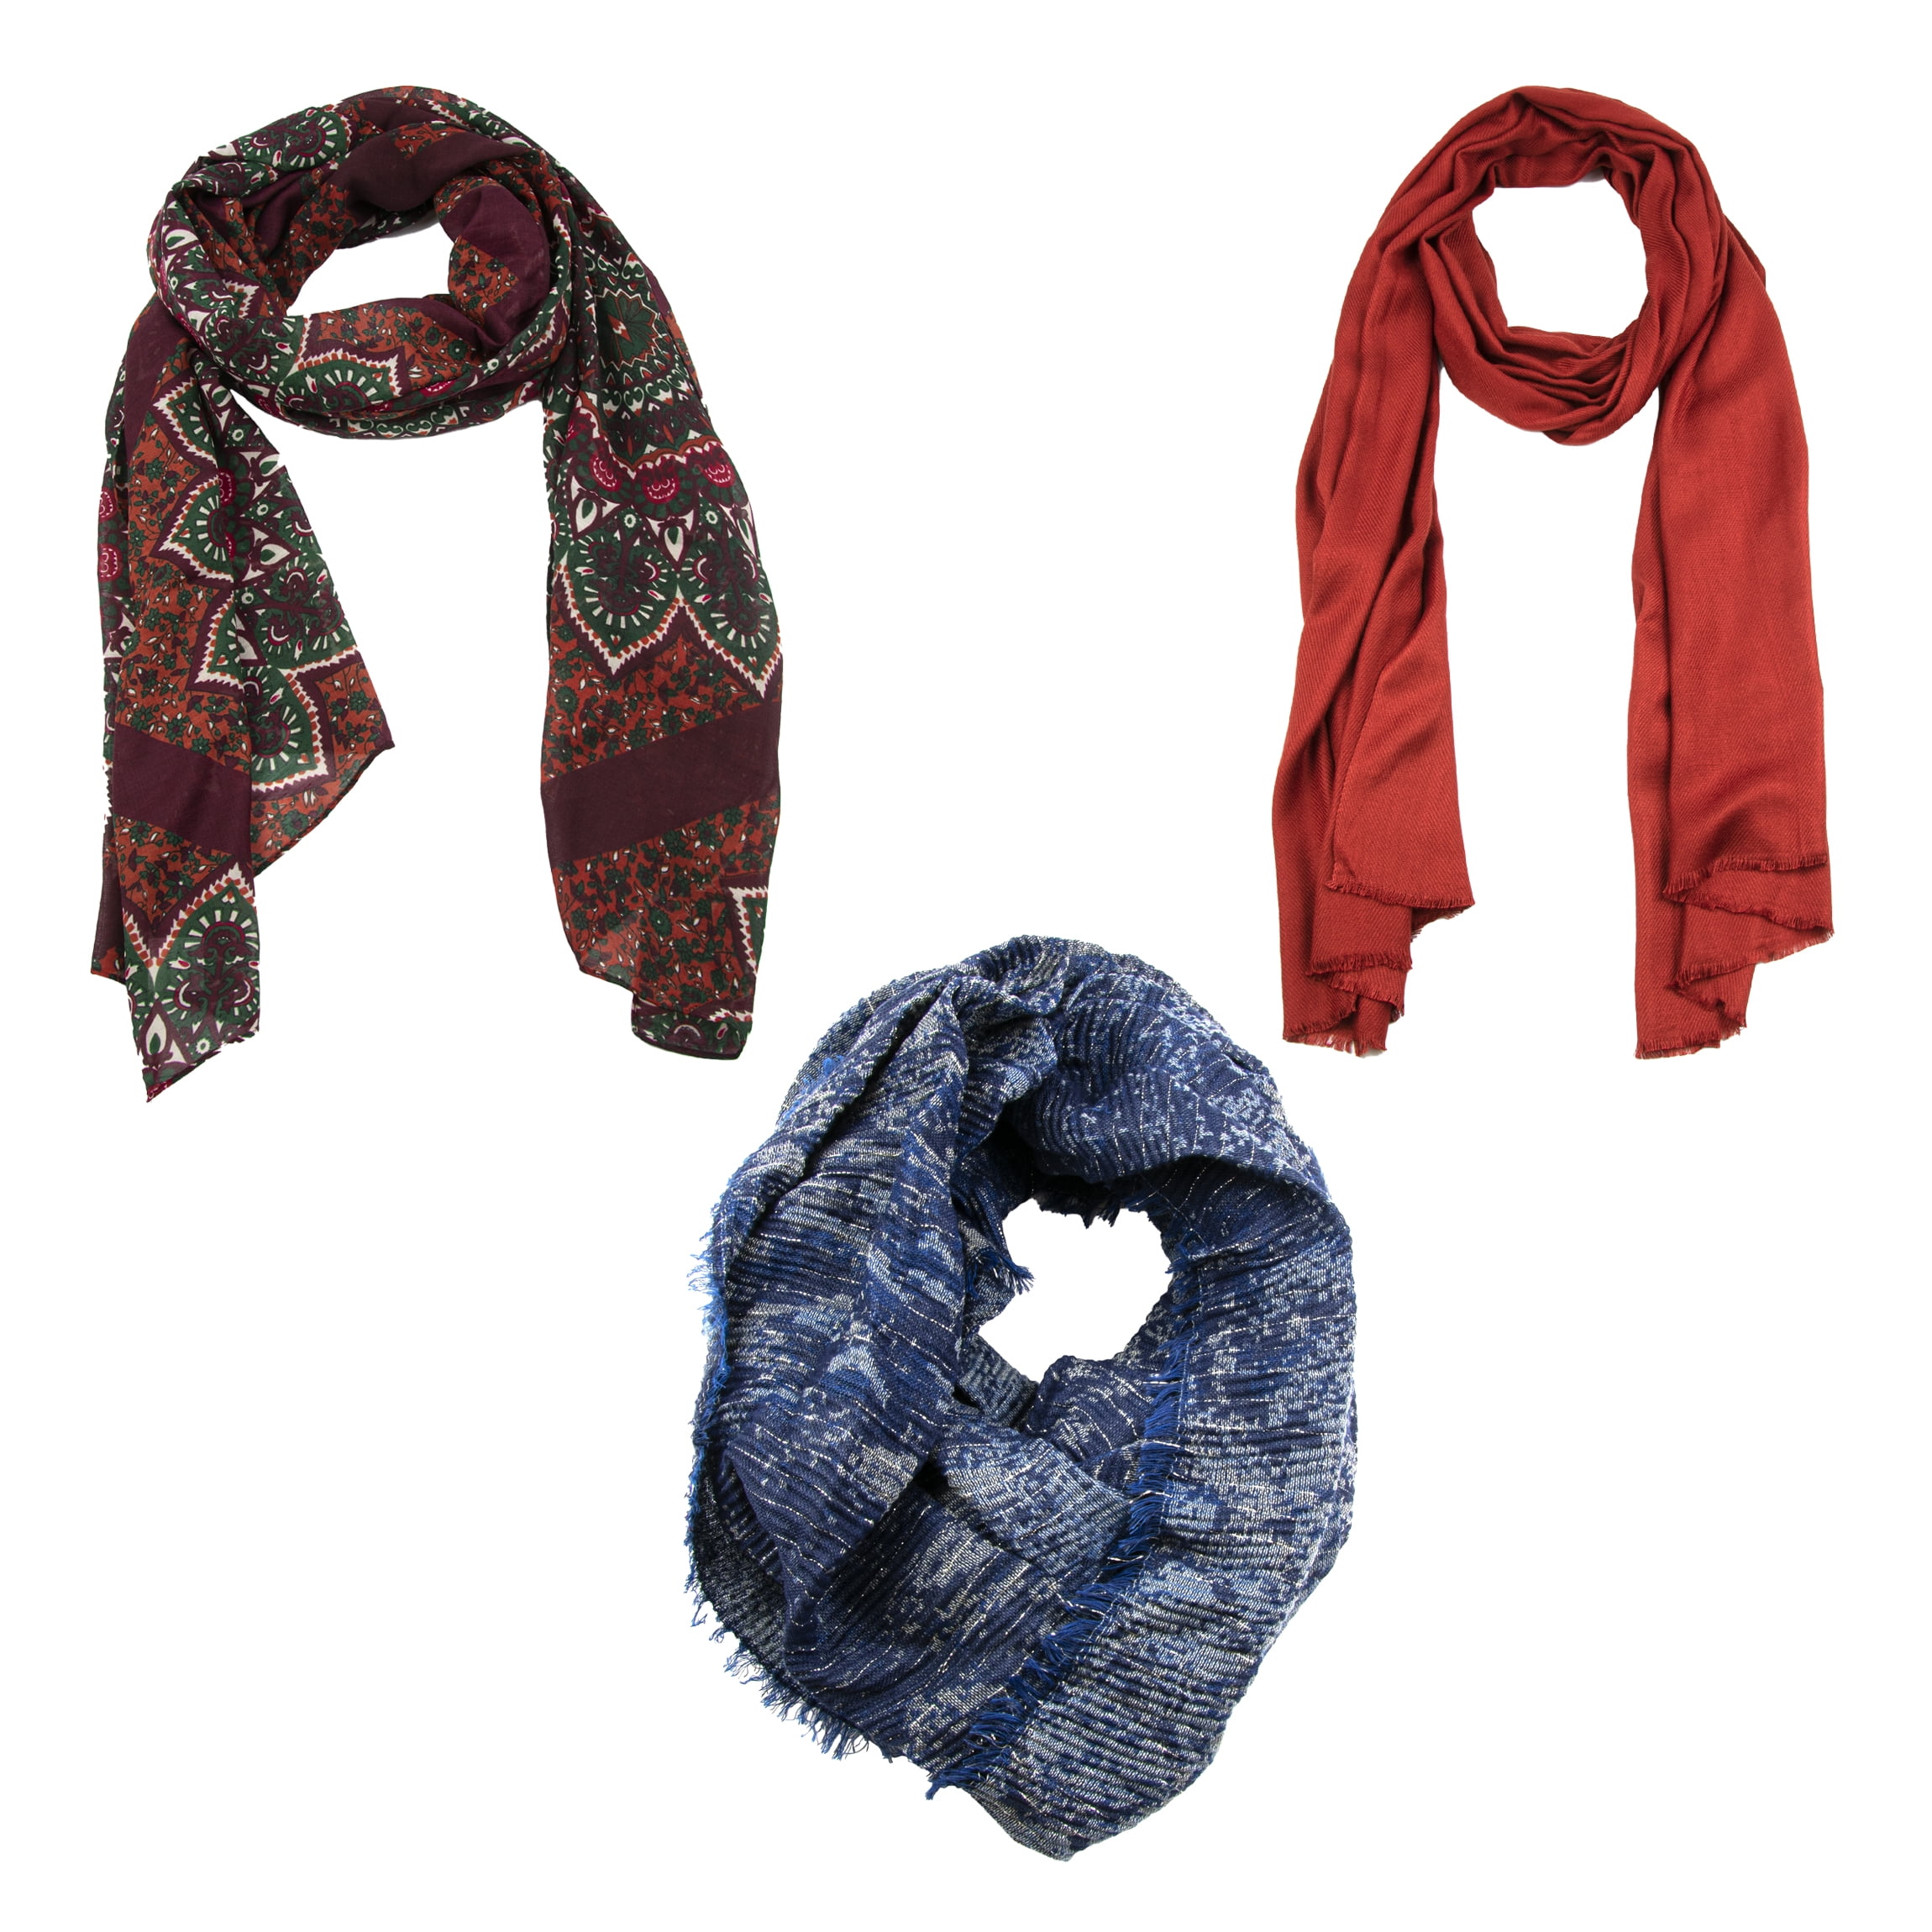 Women's Fashion Scarf Bundle - Pashmina, Classic and Infinity Style Scarves  